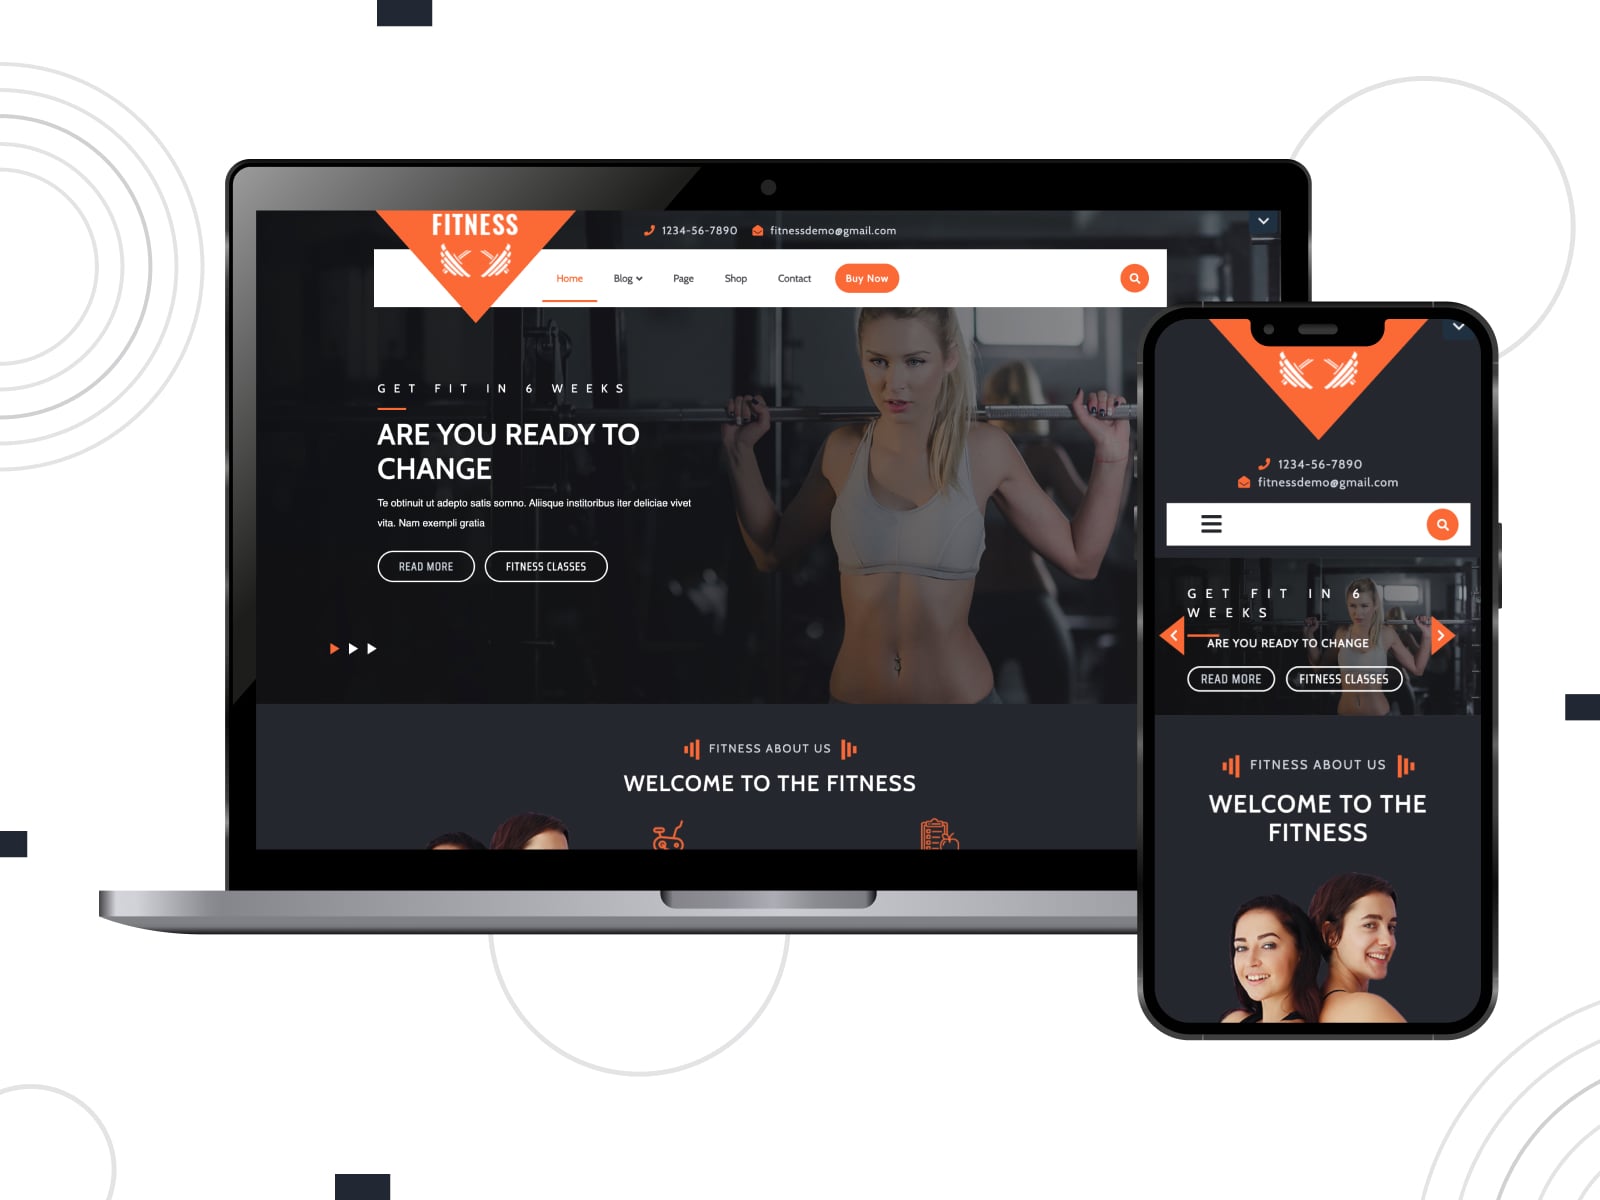 Collage of the VW Fitness Gym free personal trainer WordPress themes demo page on mobile and desktop screens.